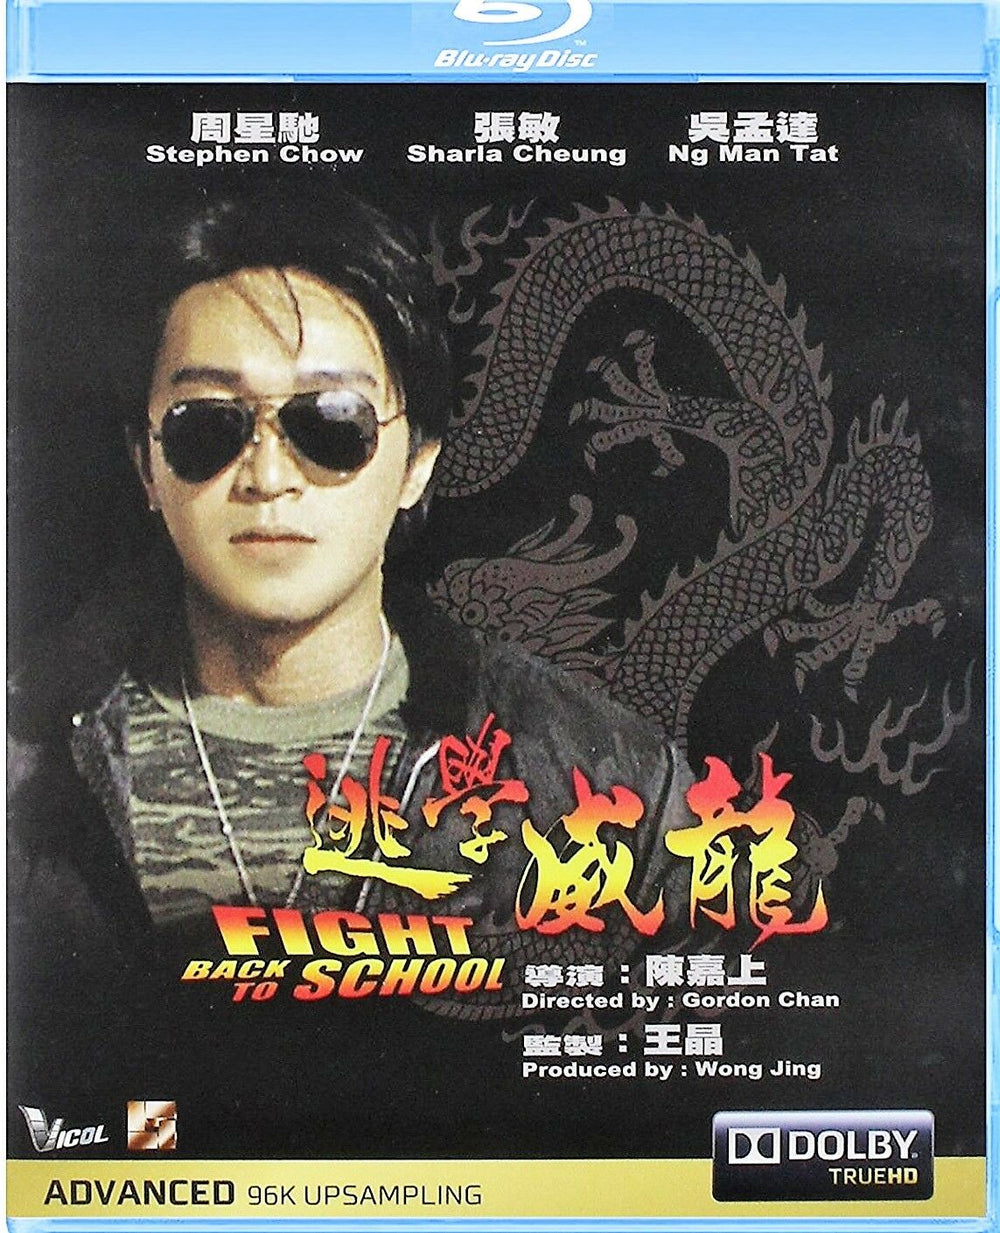 Fight Back To School 逃學威龍 1991 (Hong Kong Movie) BLU-RAY with English Subtitles (Region Free)